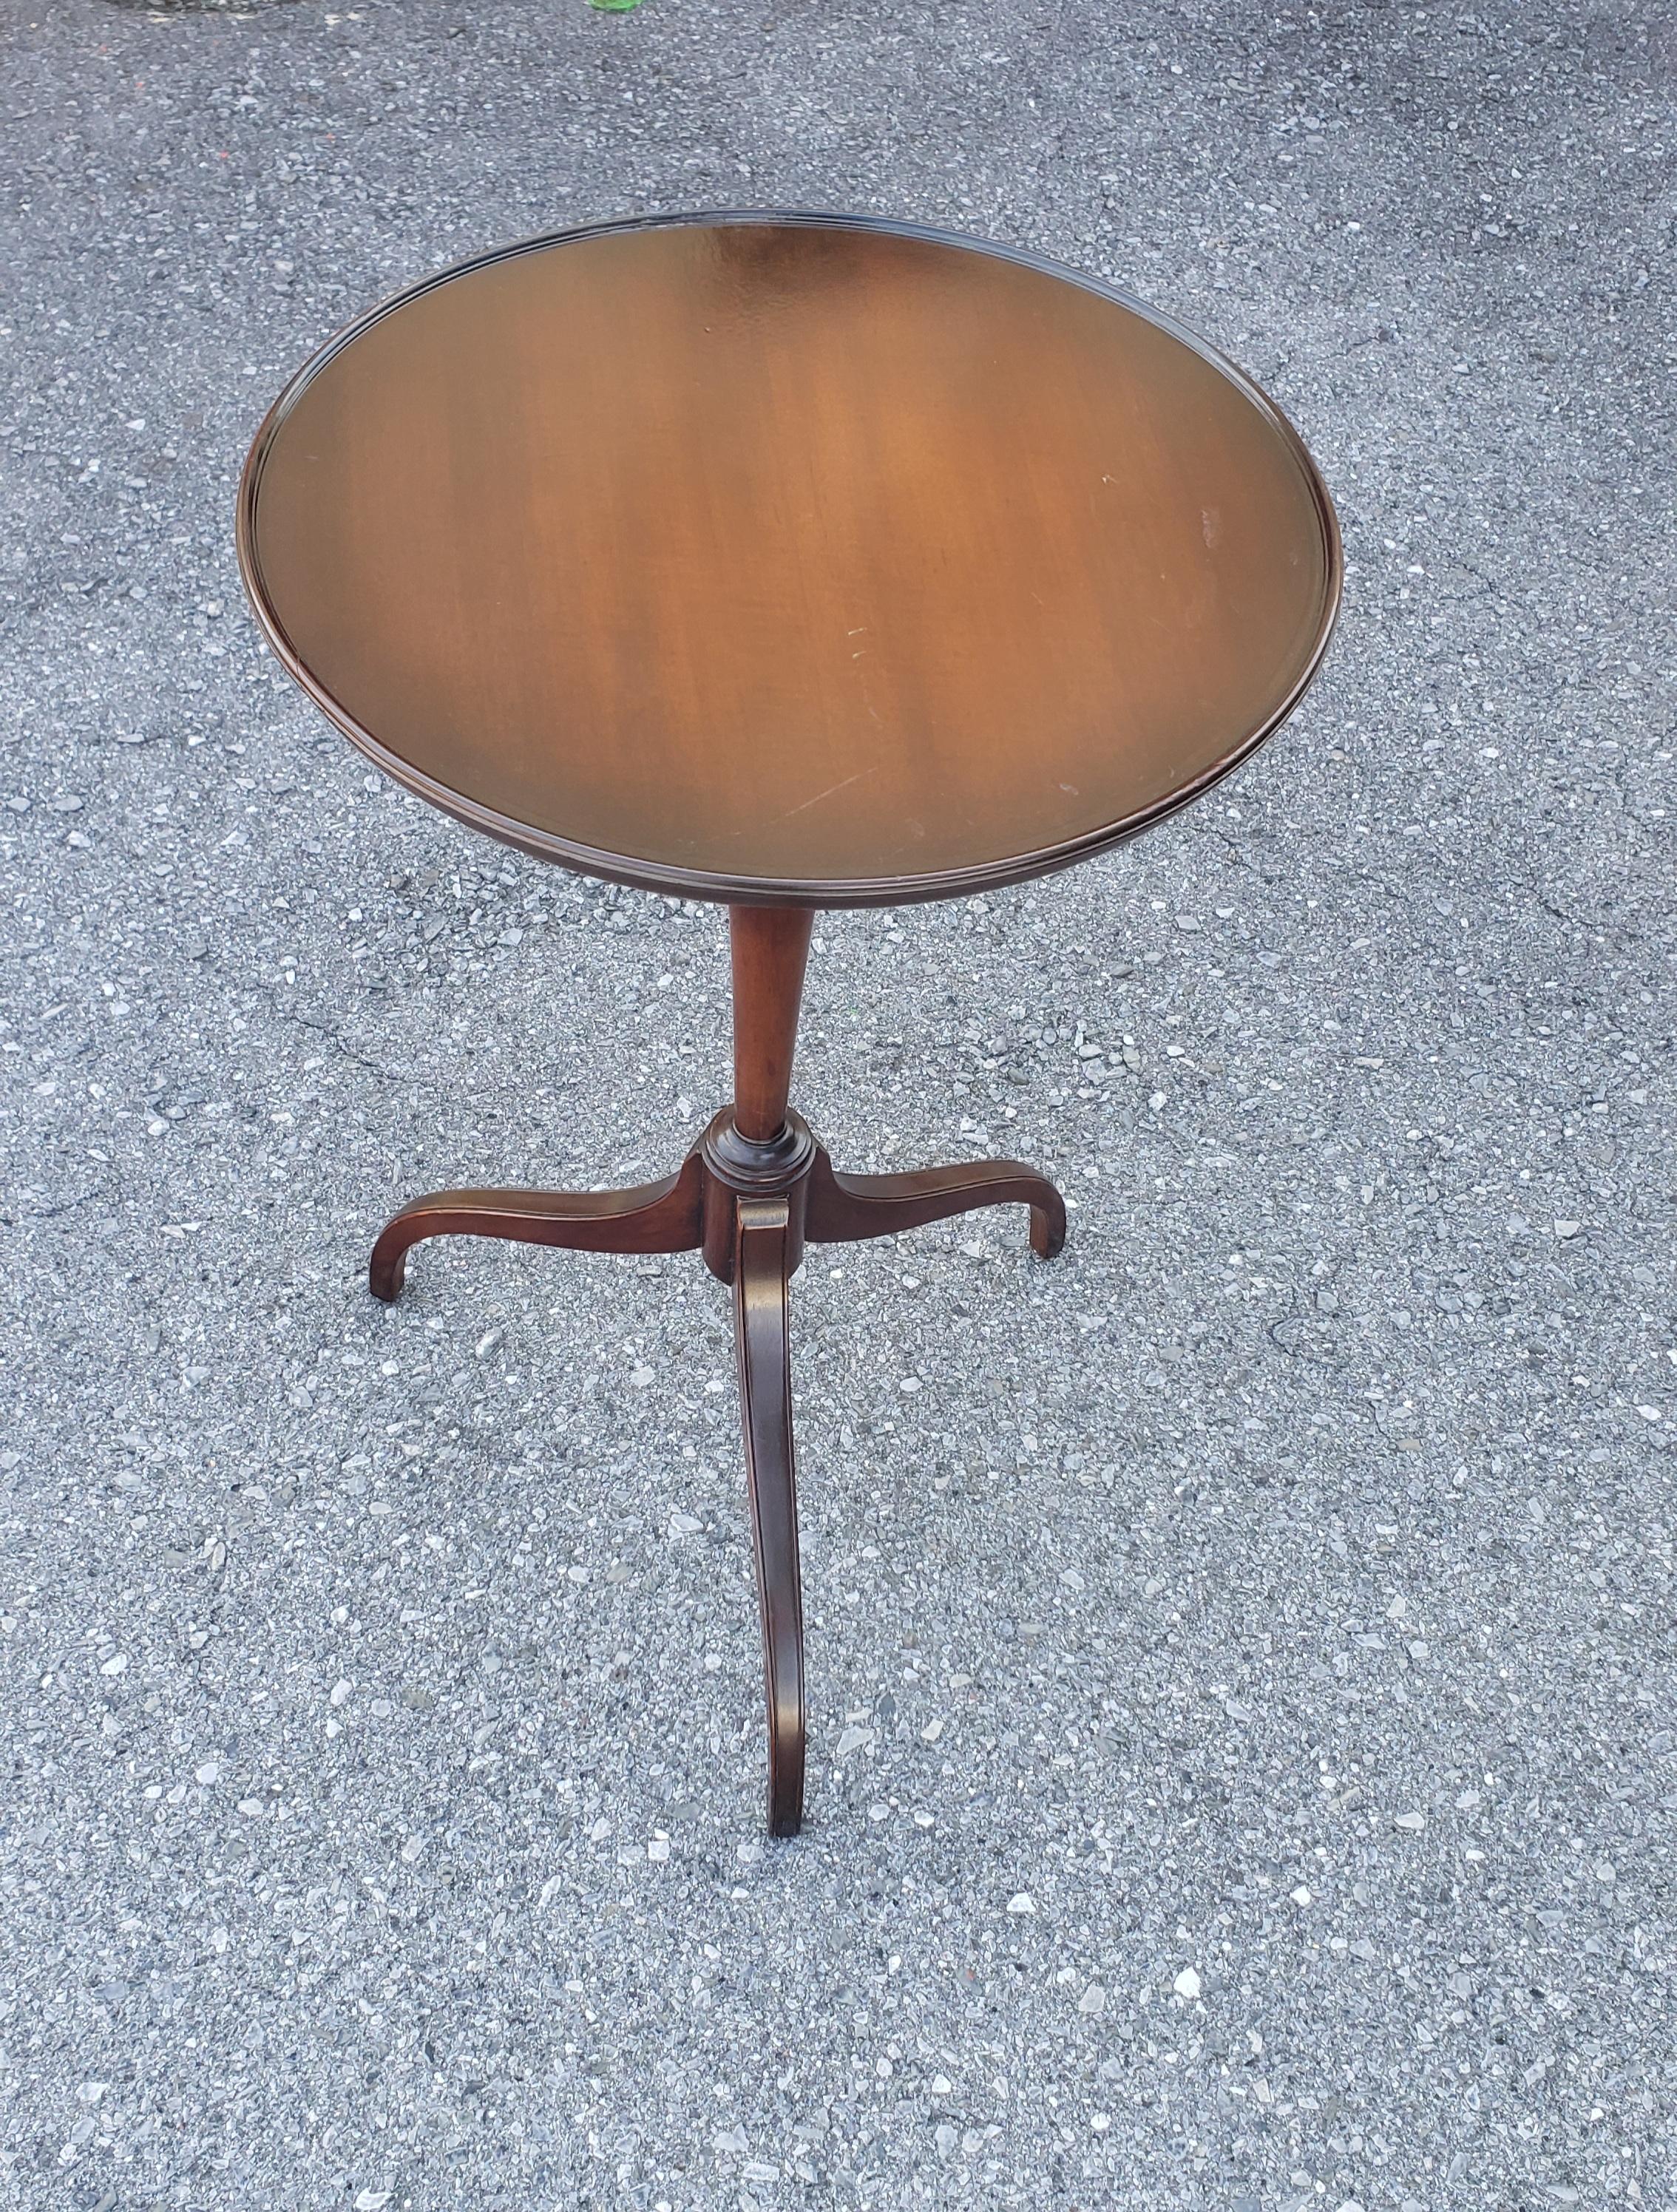 Kittinger furniture mahogany candle stand or side table with Koronet Finish and tripod spider legs. Measures 15.75